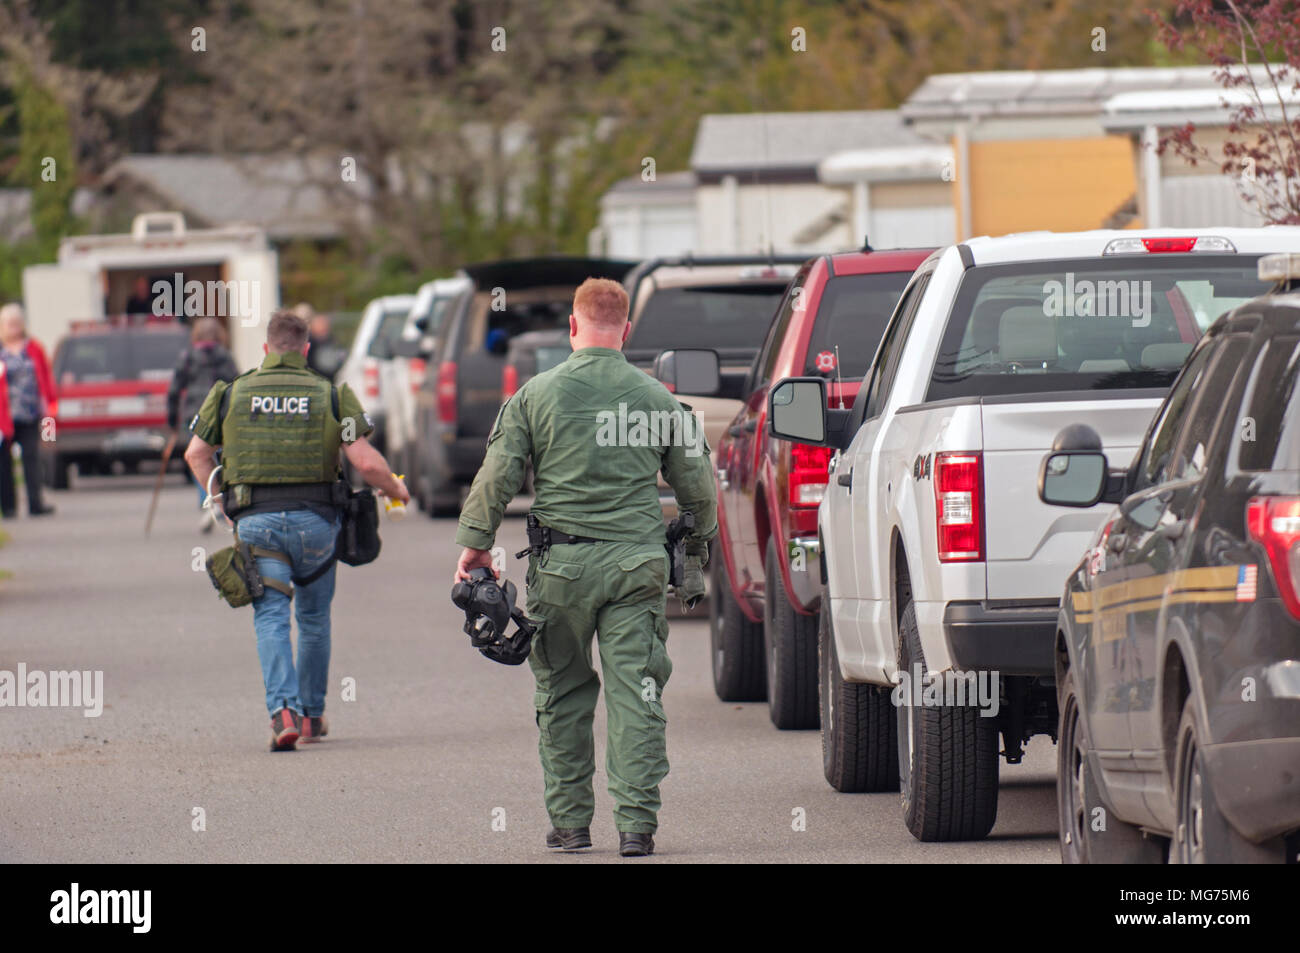 Shelton, Washington, USA, 27 April 2018.  Mason County Sheriff respond to the scene where a man stabbed a process server.  This was taken after the man was arrested and taken to the hospital witha dog bite wound.  It appears that police rammed the trailer with their SWAT vehicle.  Hidden Haven Mobile Home park scene of stand off today in Mason County. (Shawna Whelan)Hidden Haven Mobile Home park scene of stand off today in Mason County. Credit: Shawna Whelan/Alamy Live News Stock Photo